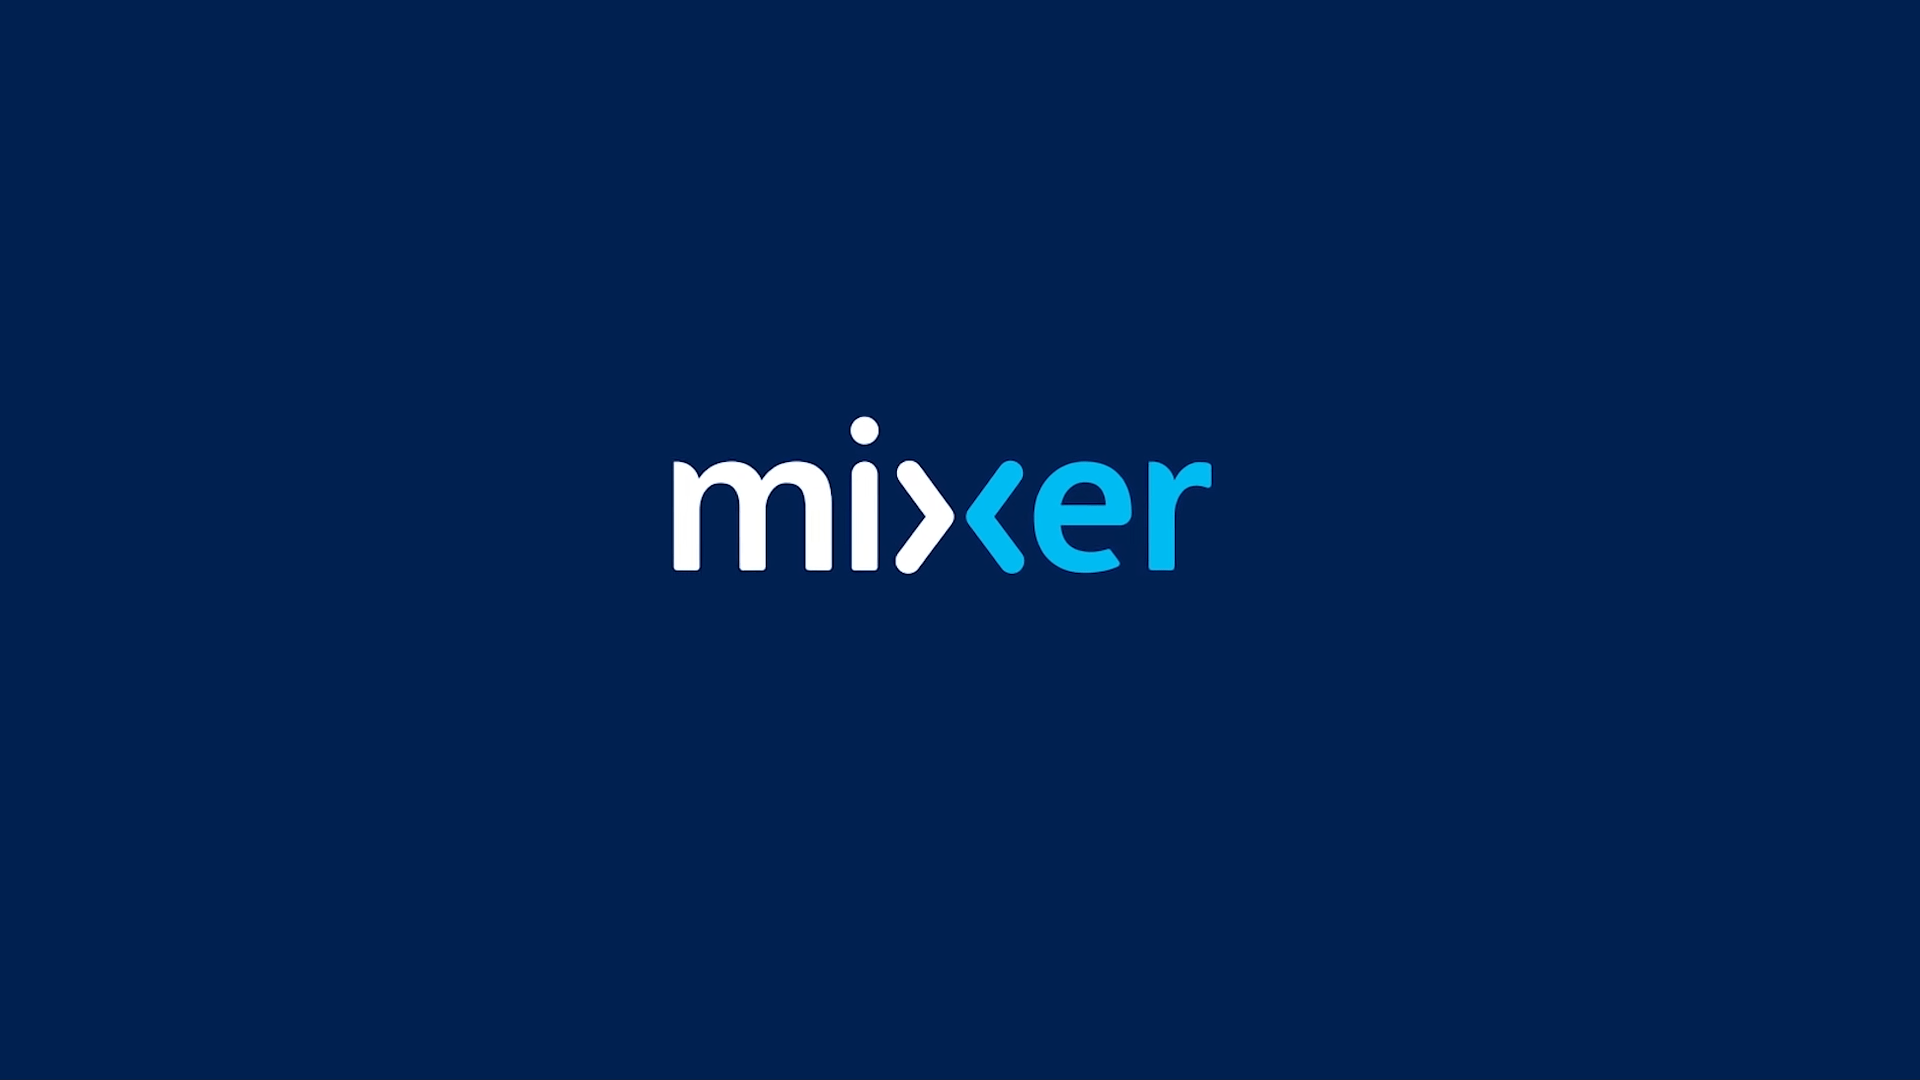 Mixer Has Officially Closed And Begins Shunting Users Over To Facebook Gaming